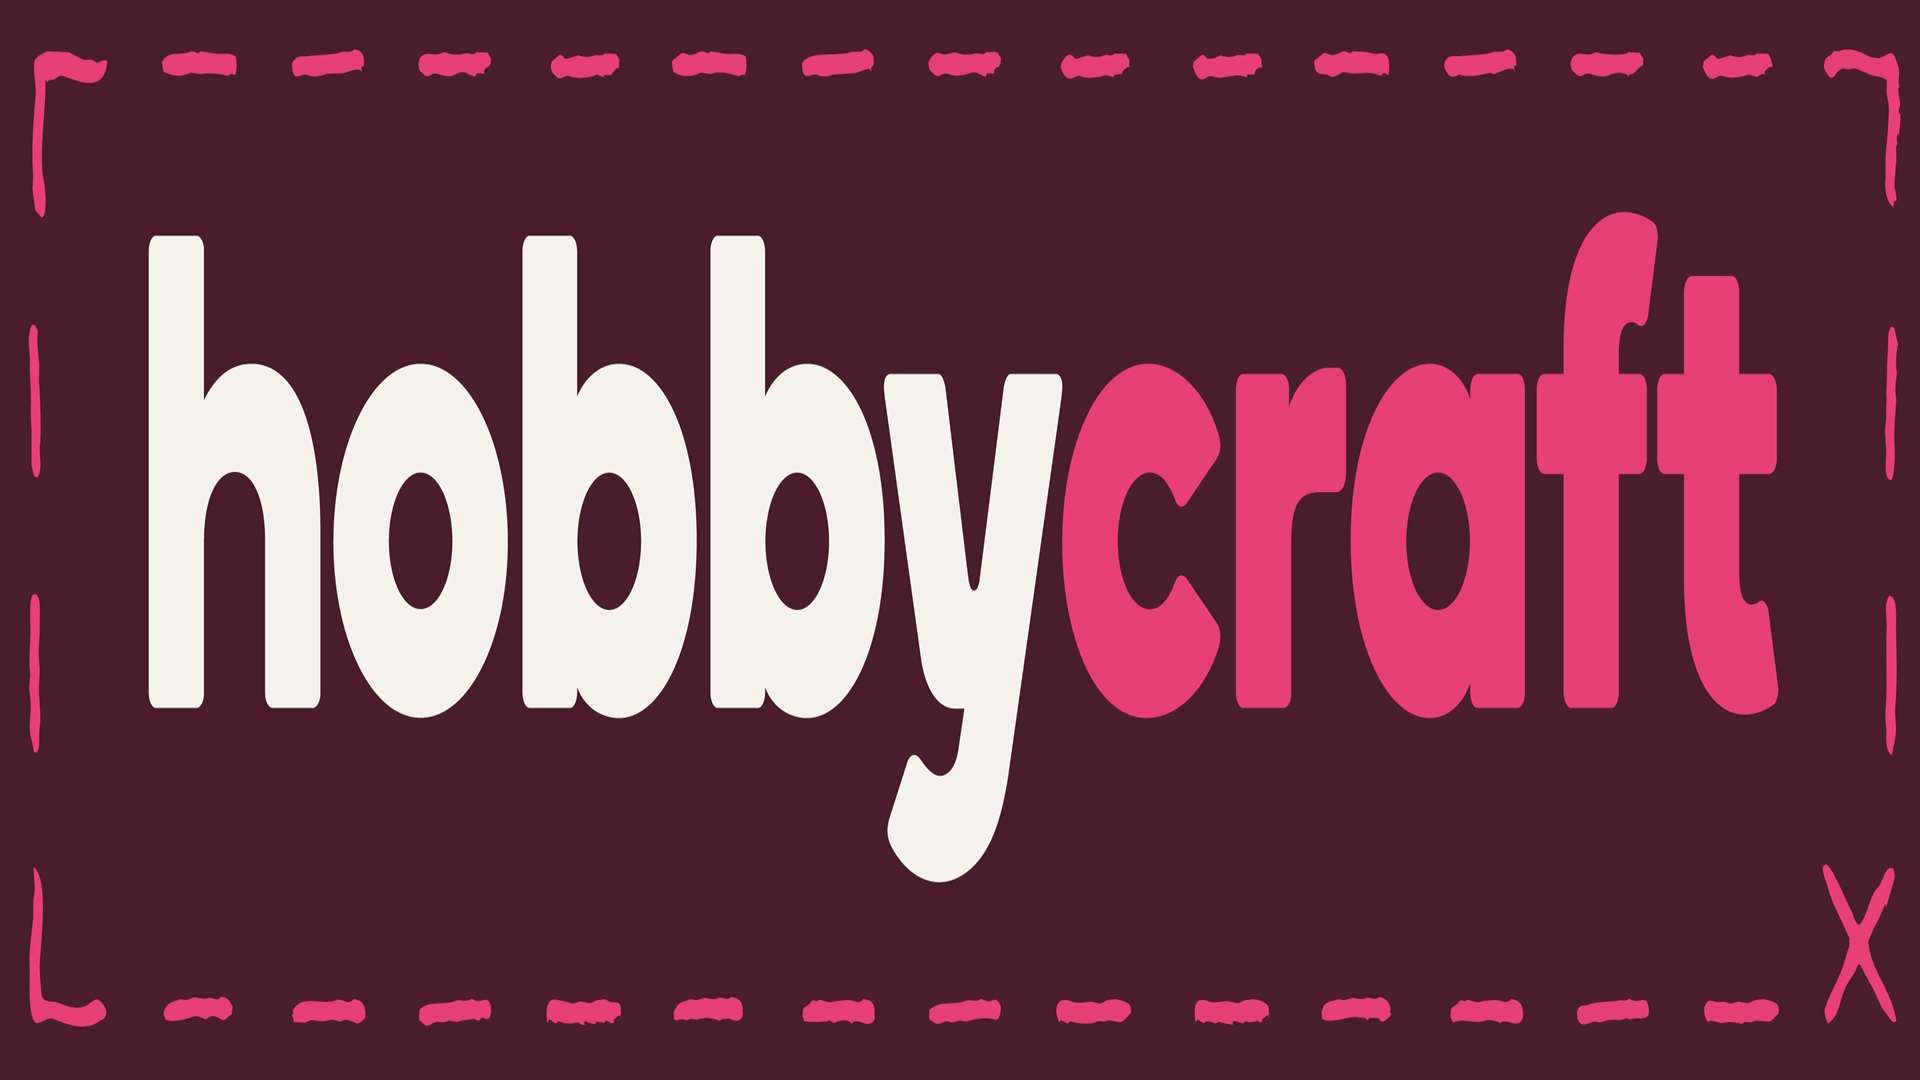 hobbycraft-emerges-from-lockdown-in-strong-position-after-online